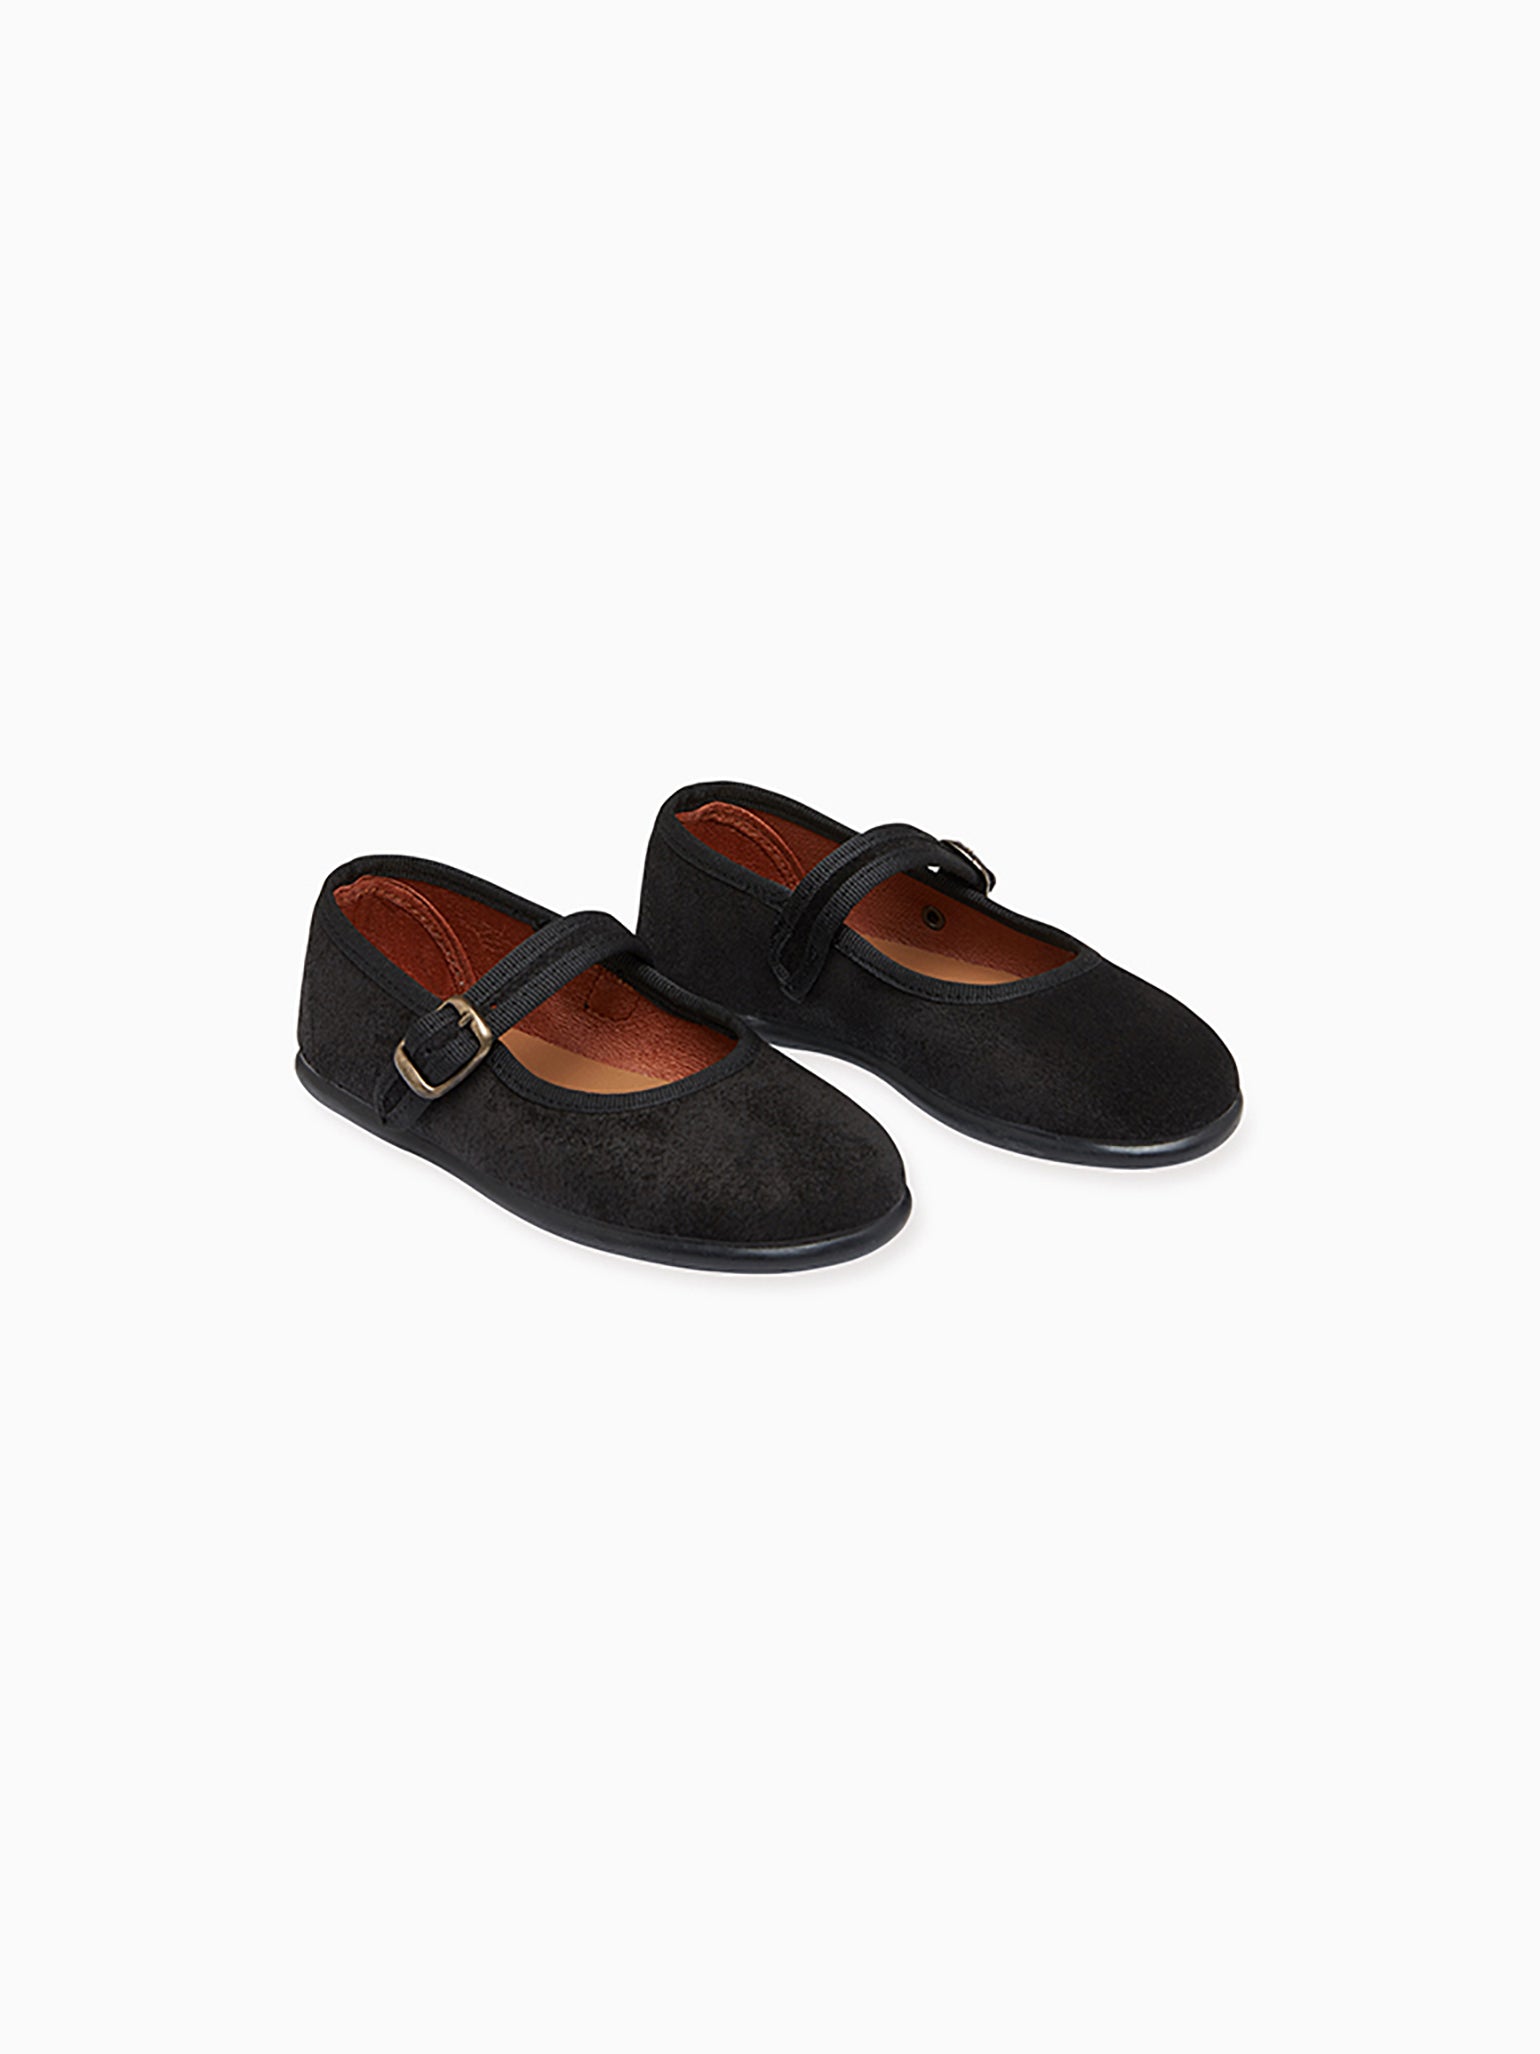 Black Suede Girl Mary Jane Shoes